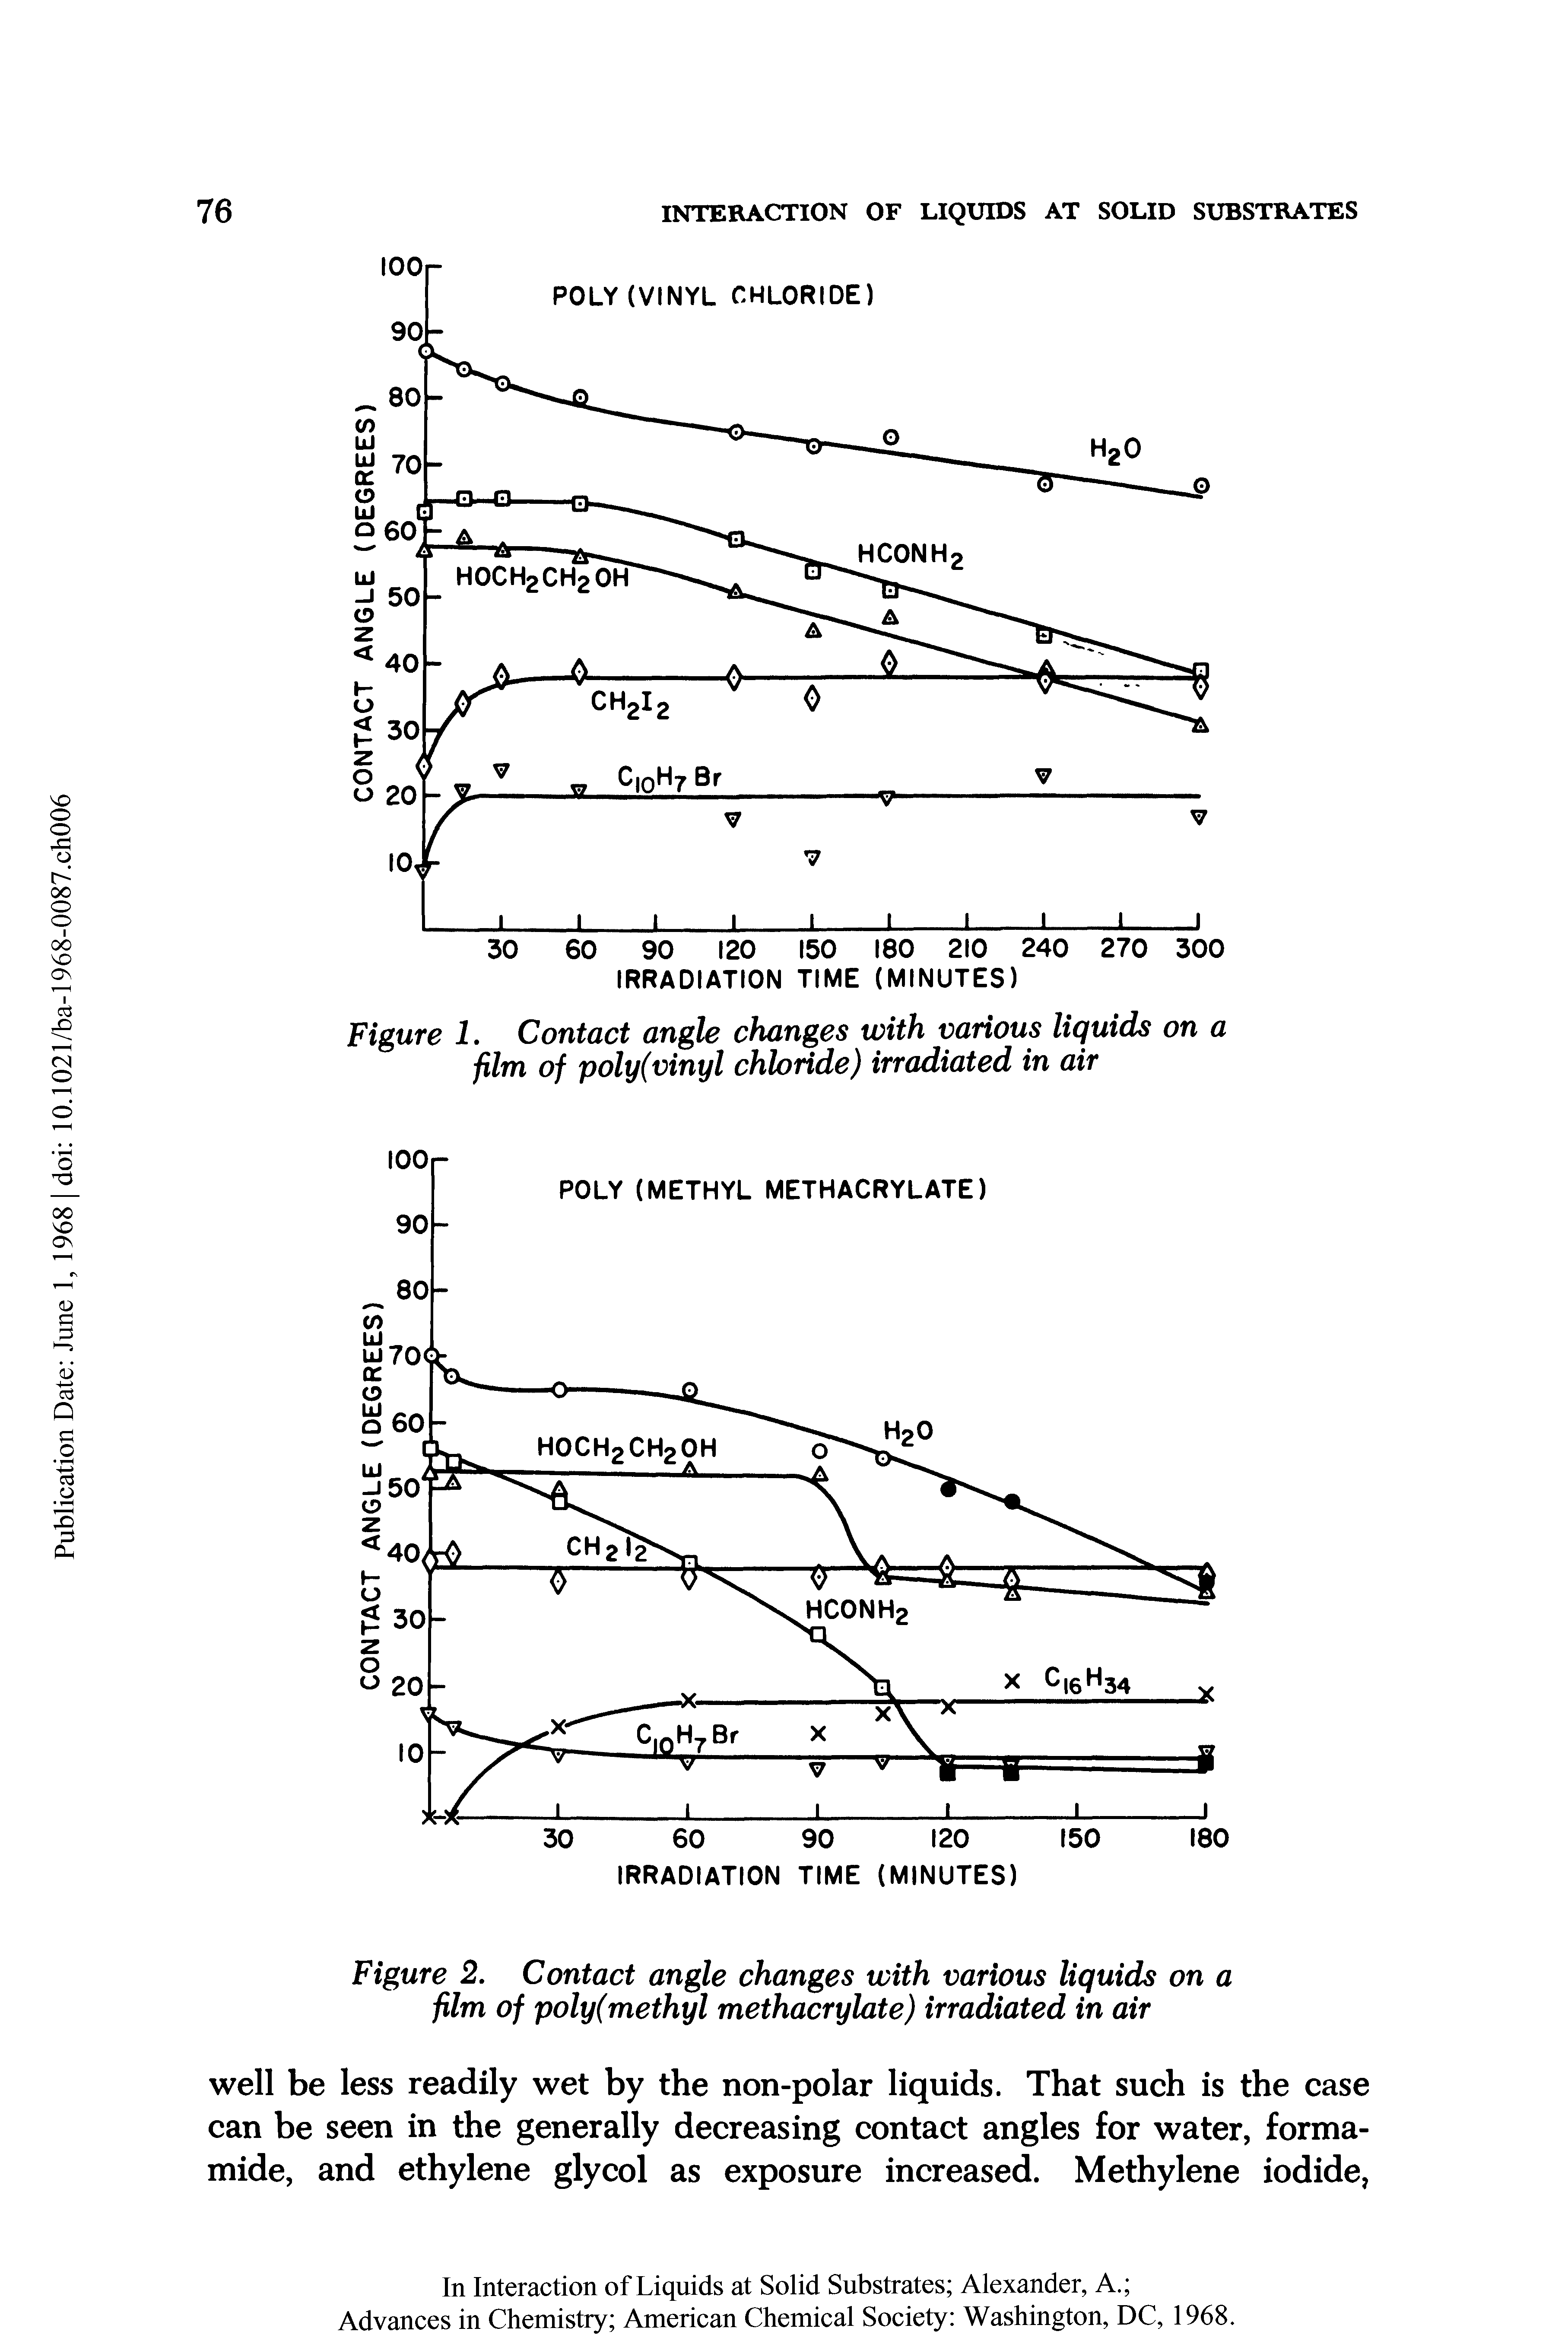 Figure 2. Contact angle changes with various liquids on a film of poly (methyl methacrylate) irradiated in air...